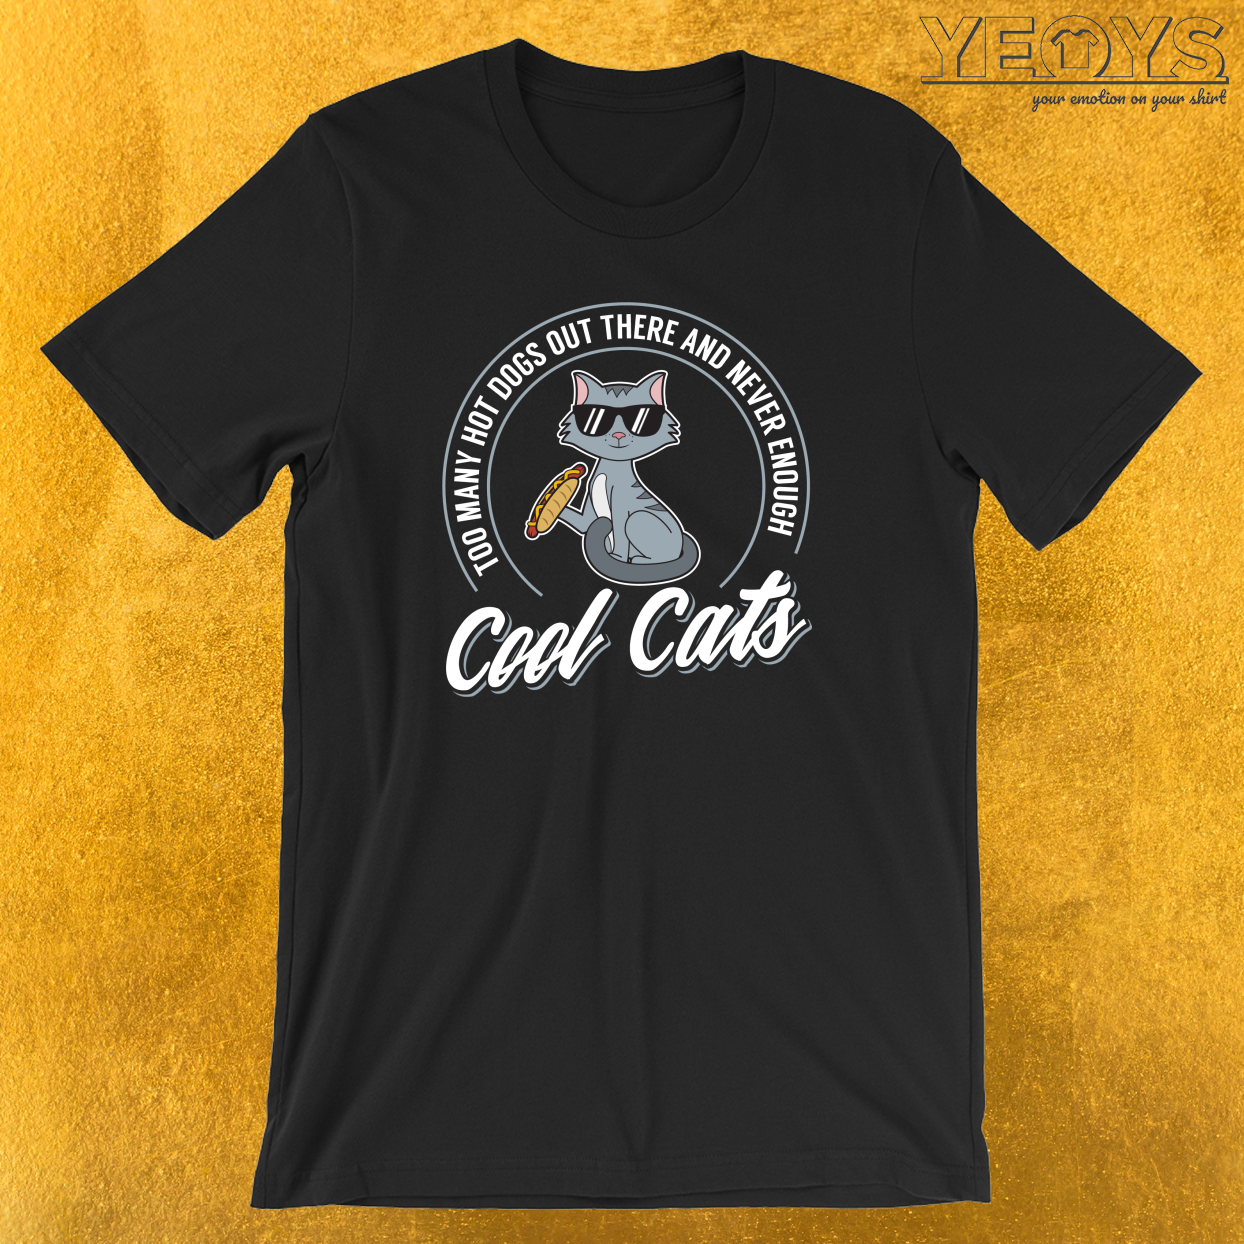 Too Many Hot Dogs Out There And Never Enough Cool Cats T-Shirt